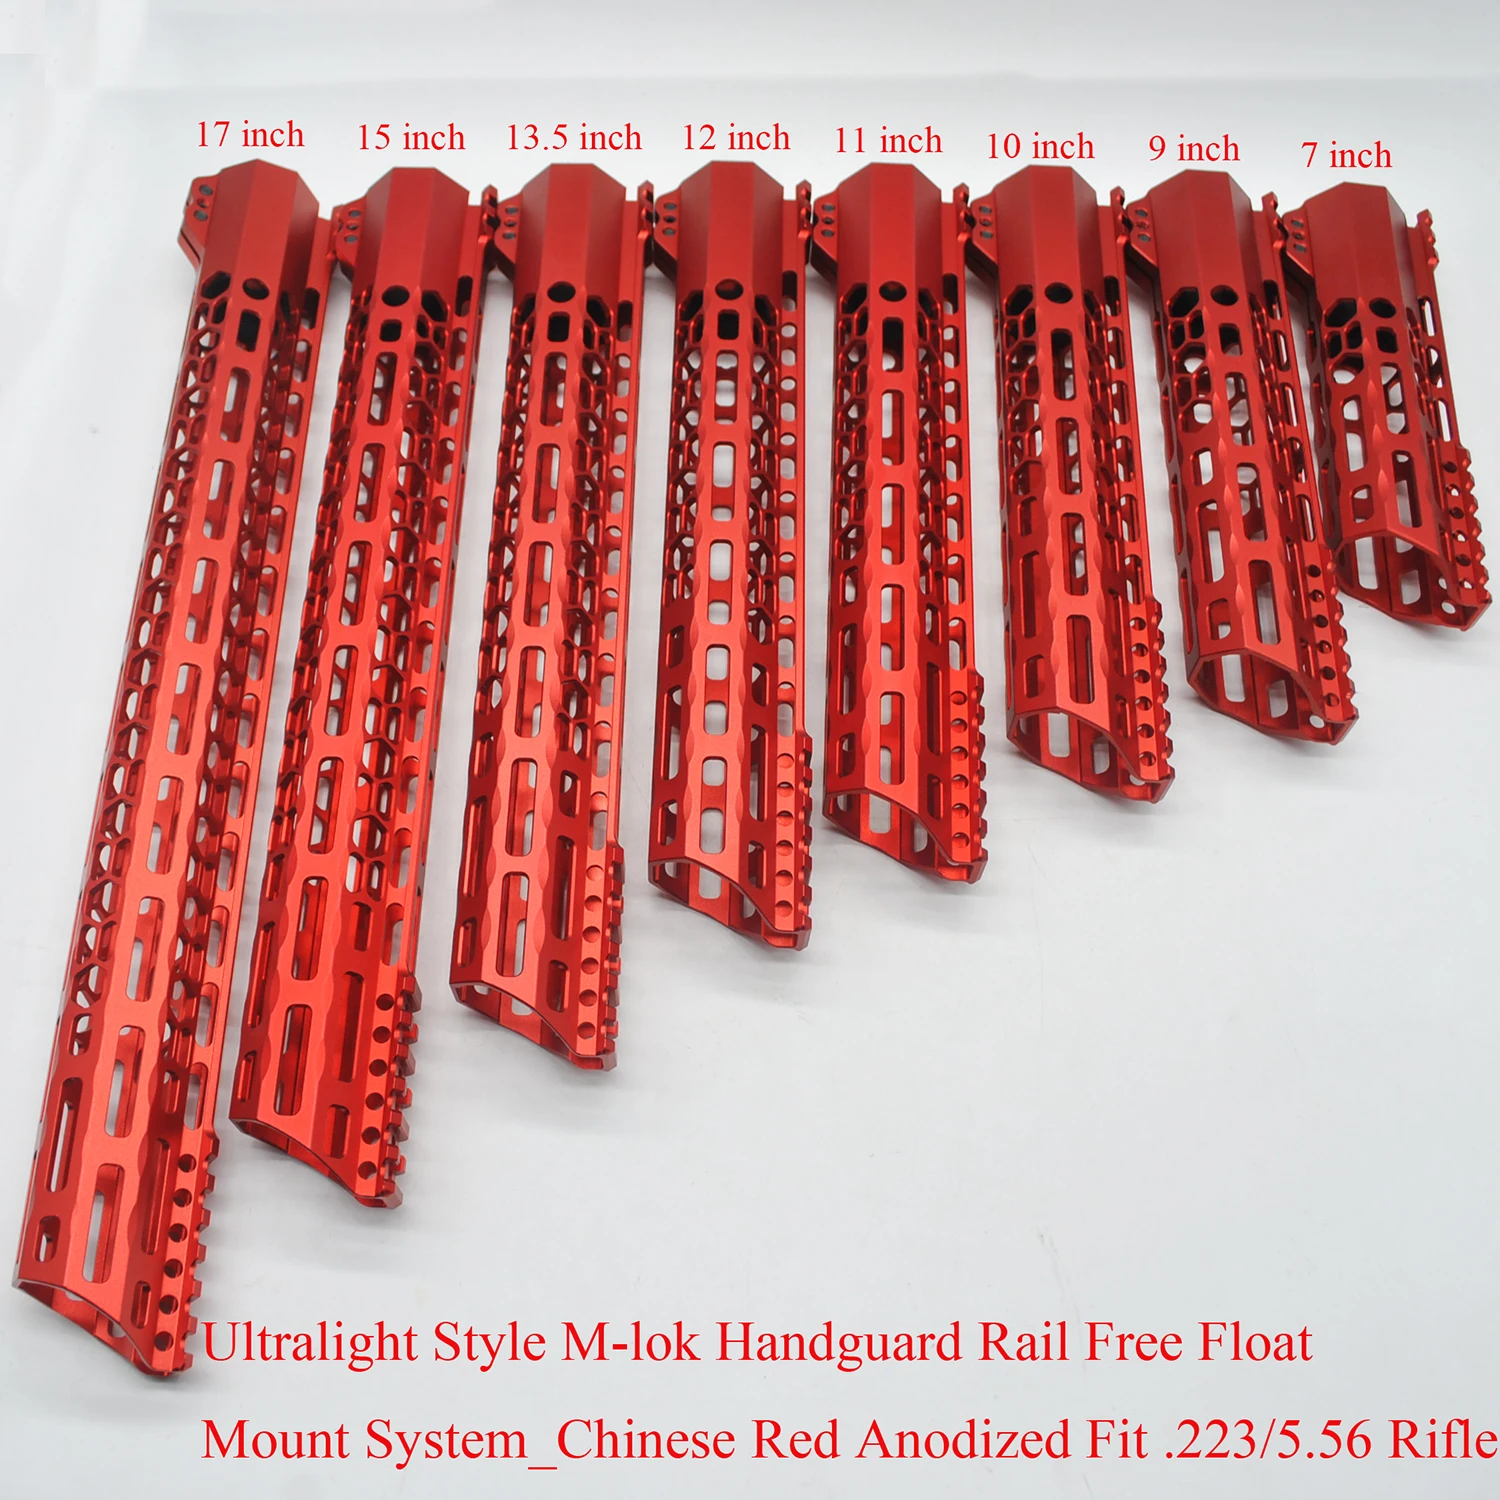 

TriRock 7/9/10/11/12/13.5/15/17'' inch Unique M-lok Clamping Handguard Rail Free Float Mount System Red Anodized Fit .223/5.56